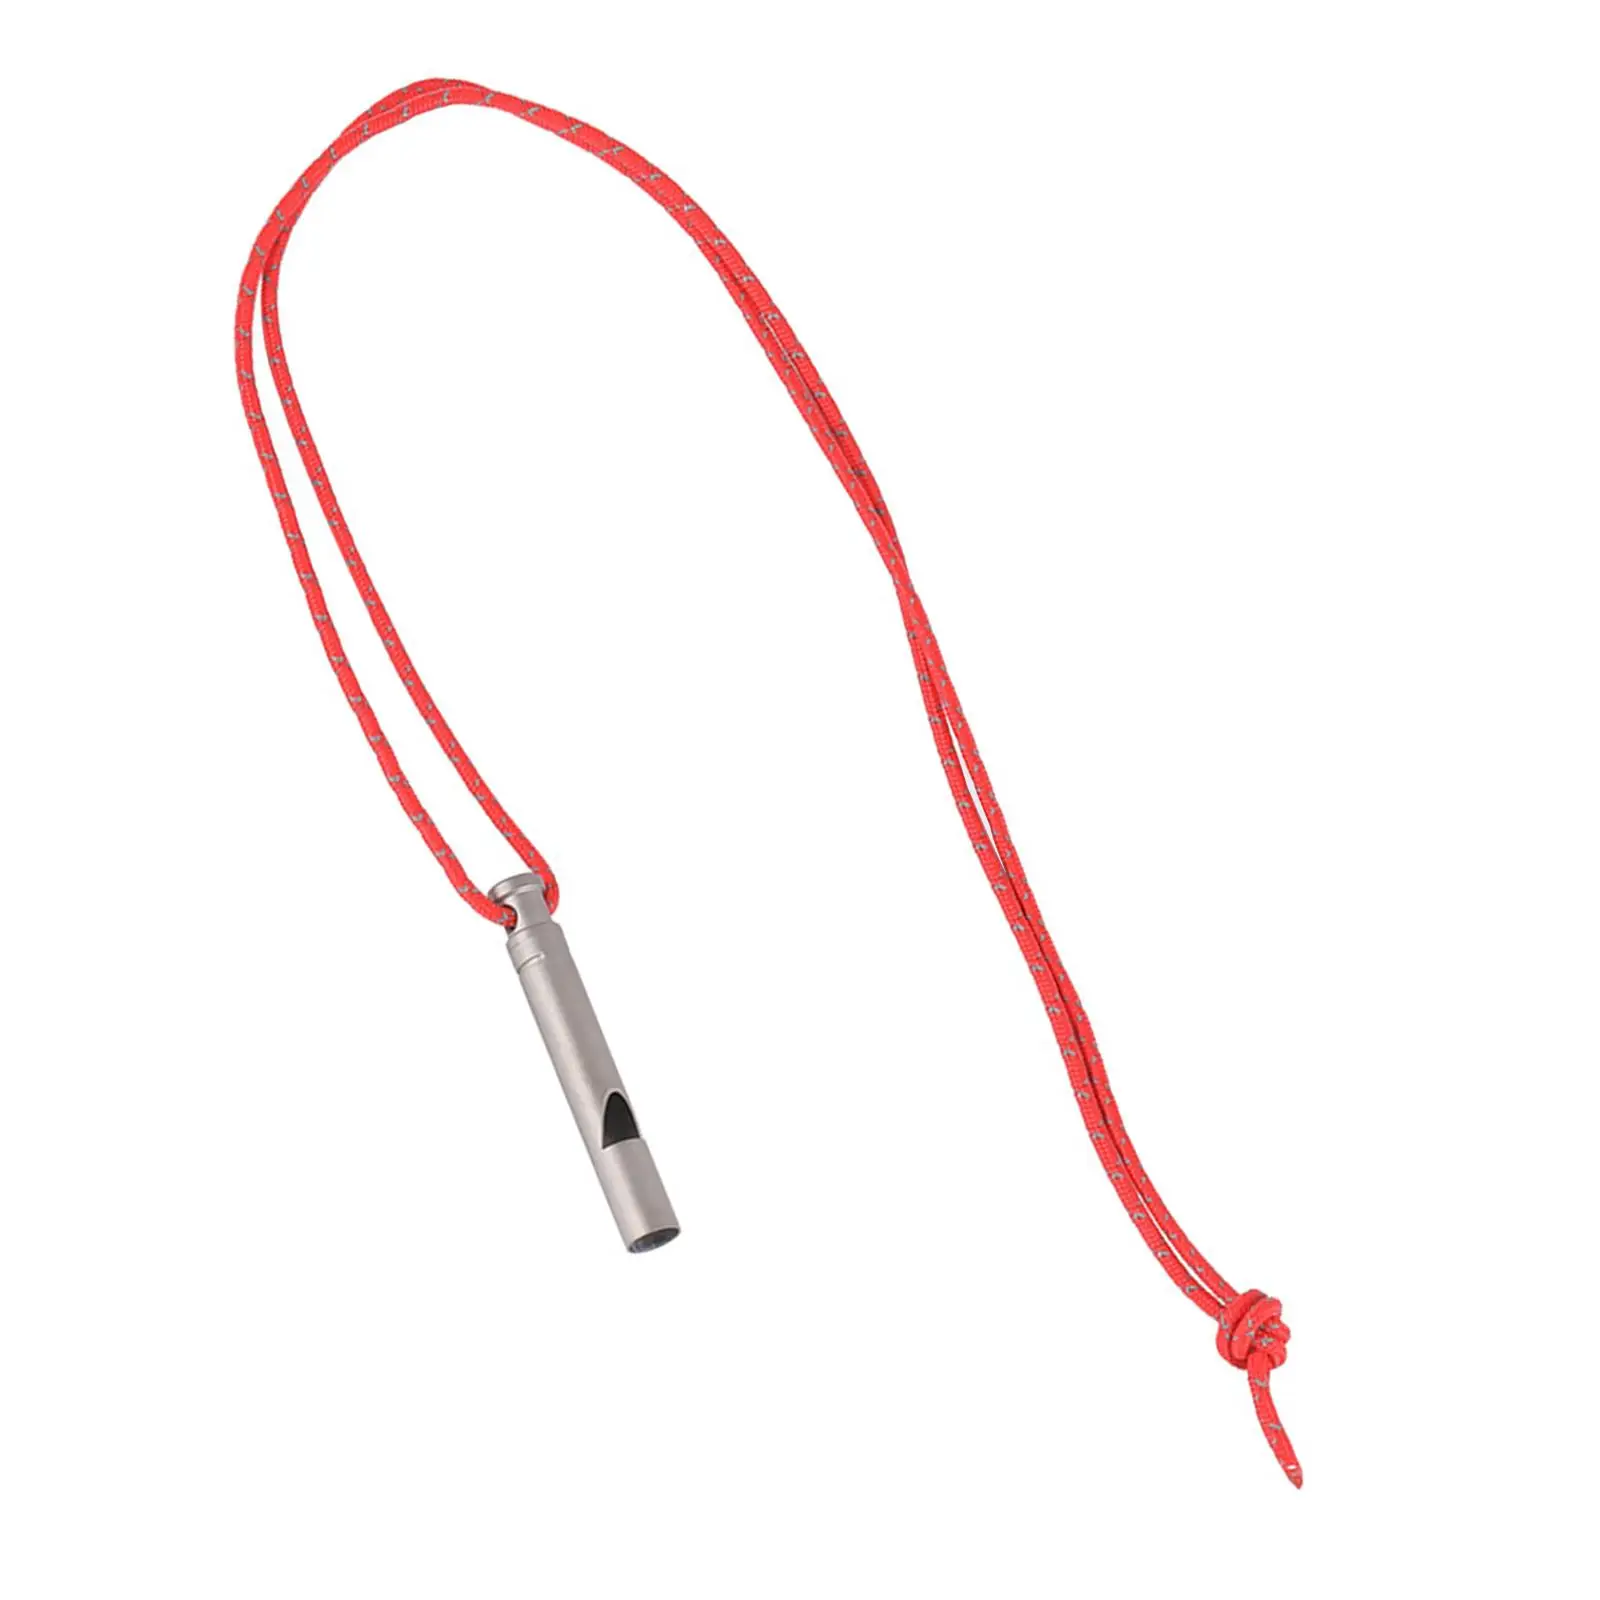 High Boom Emergency Whistle with Cable Kit for Hiking, Camping And Exploring